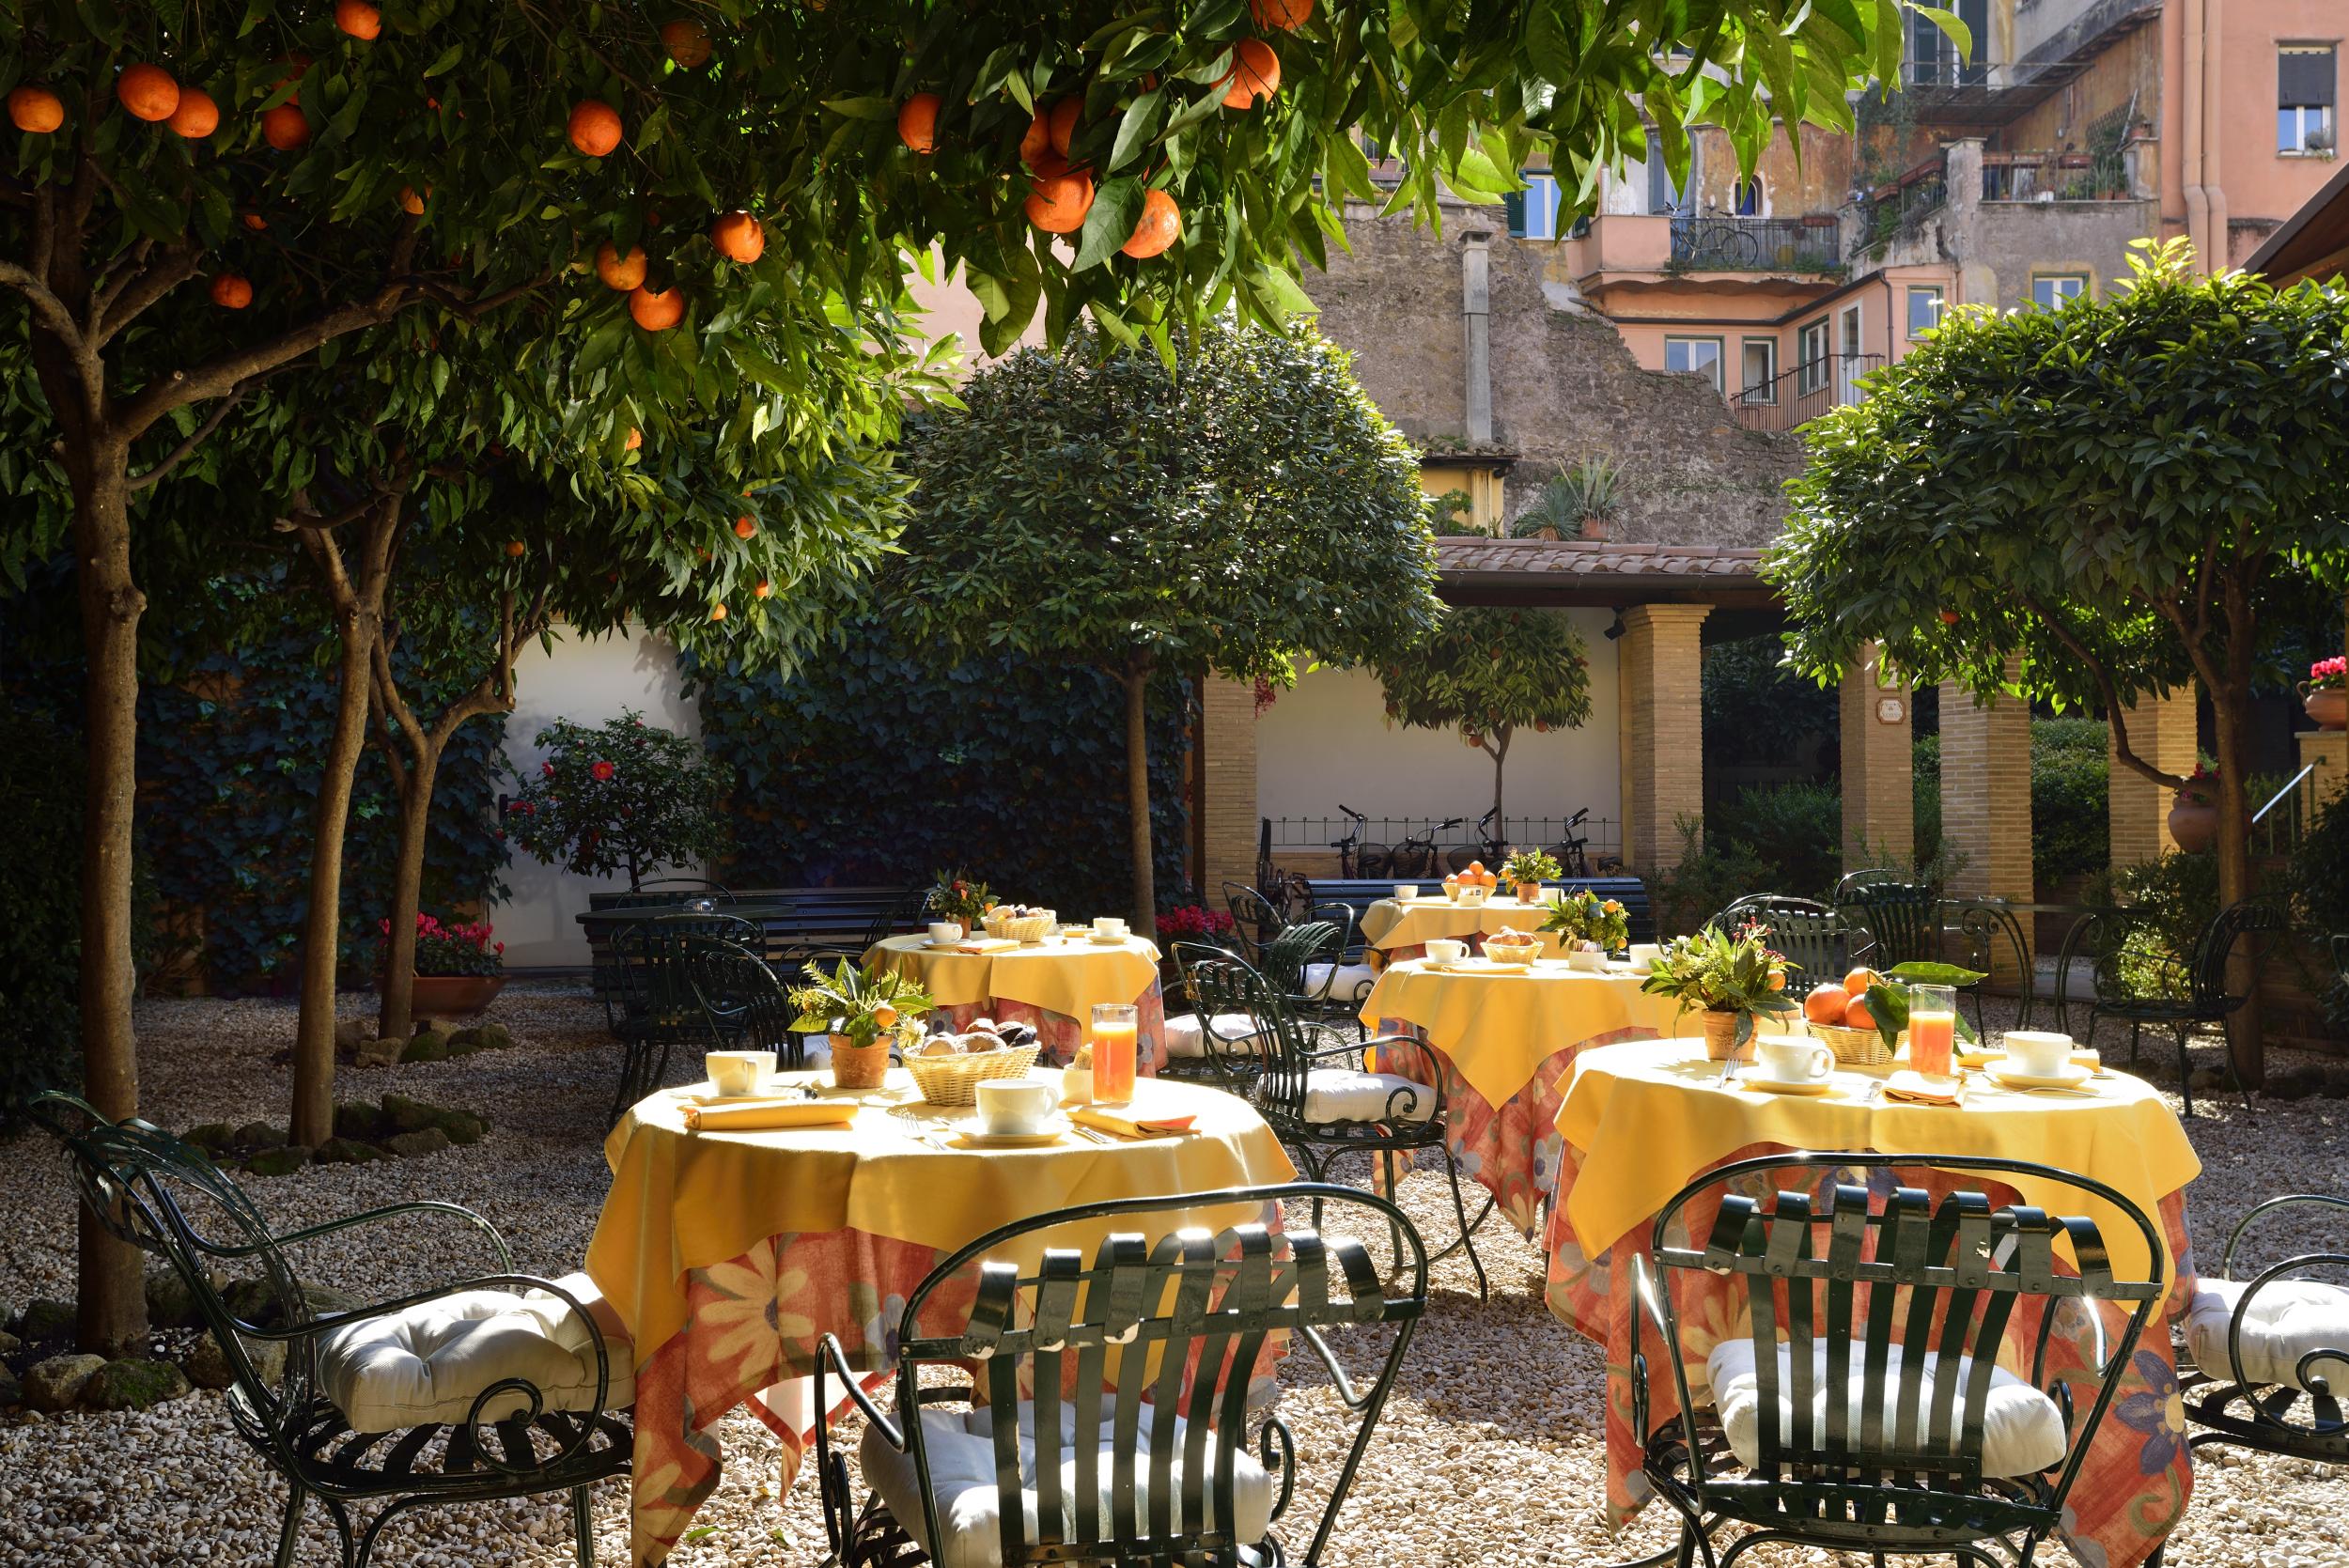 Hotel Santa Maria is located in the heart of lively Trastevere